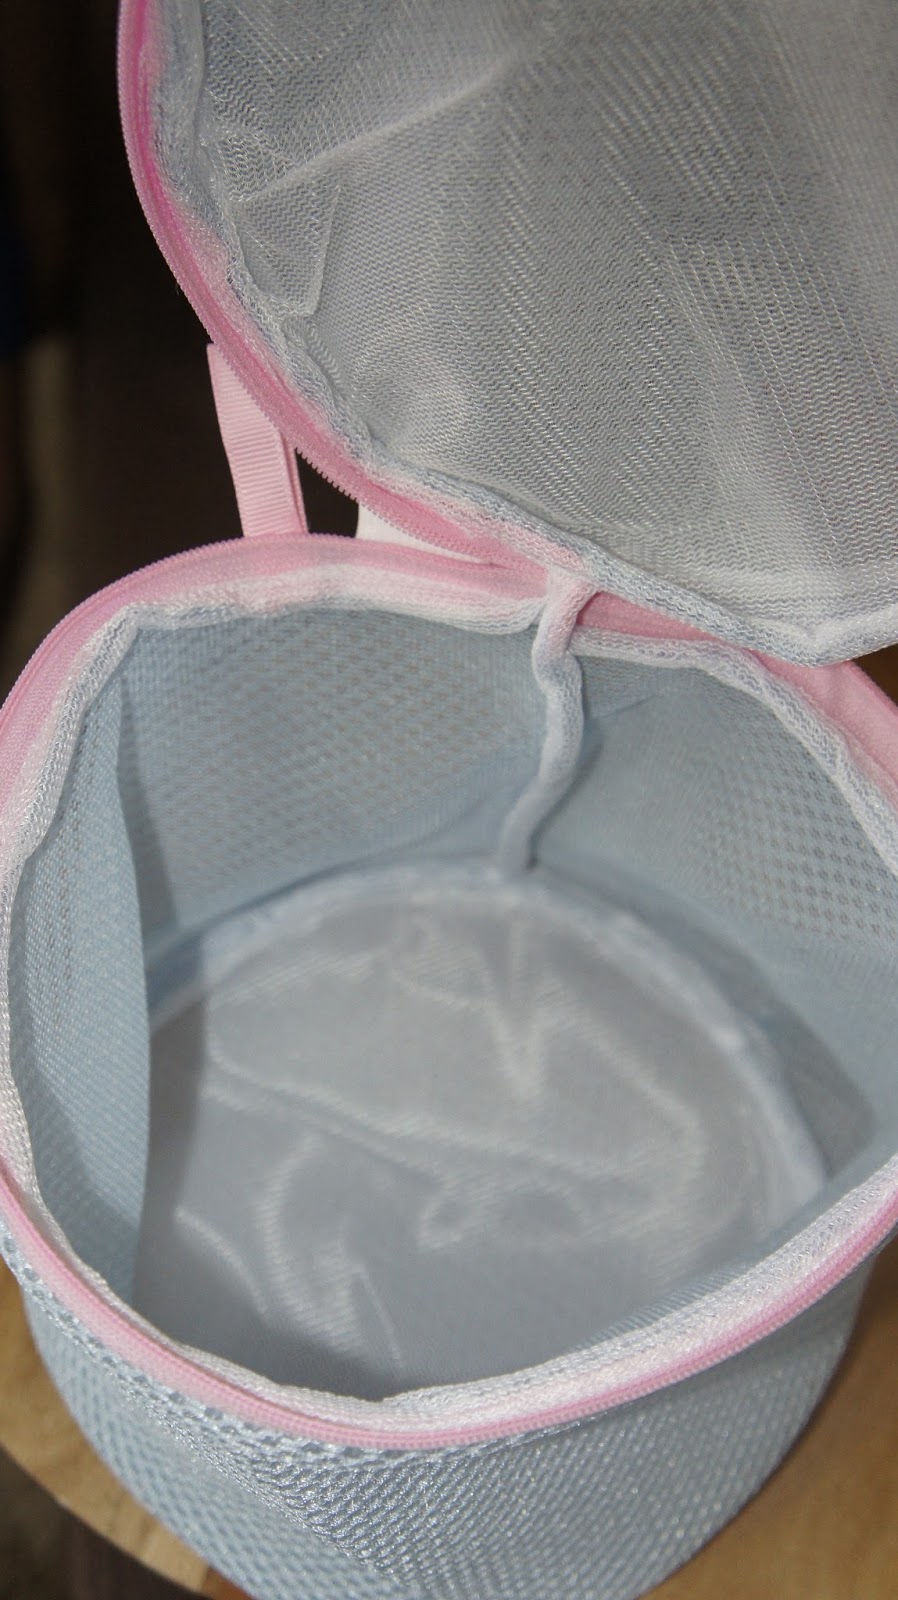 Set of 3 Zippered Mesh Bra Wash Bags by BTSKY ~ Let Me Review That For You!